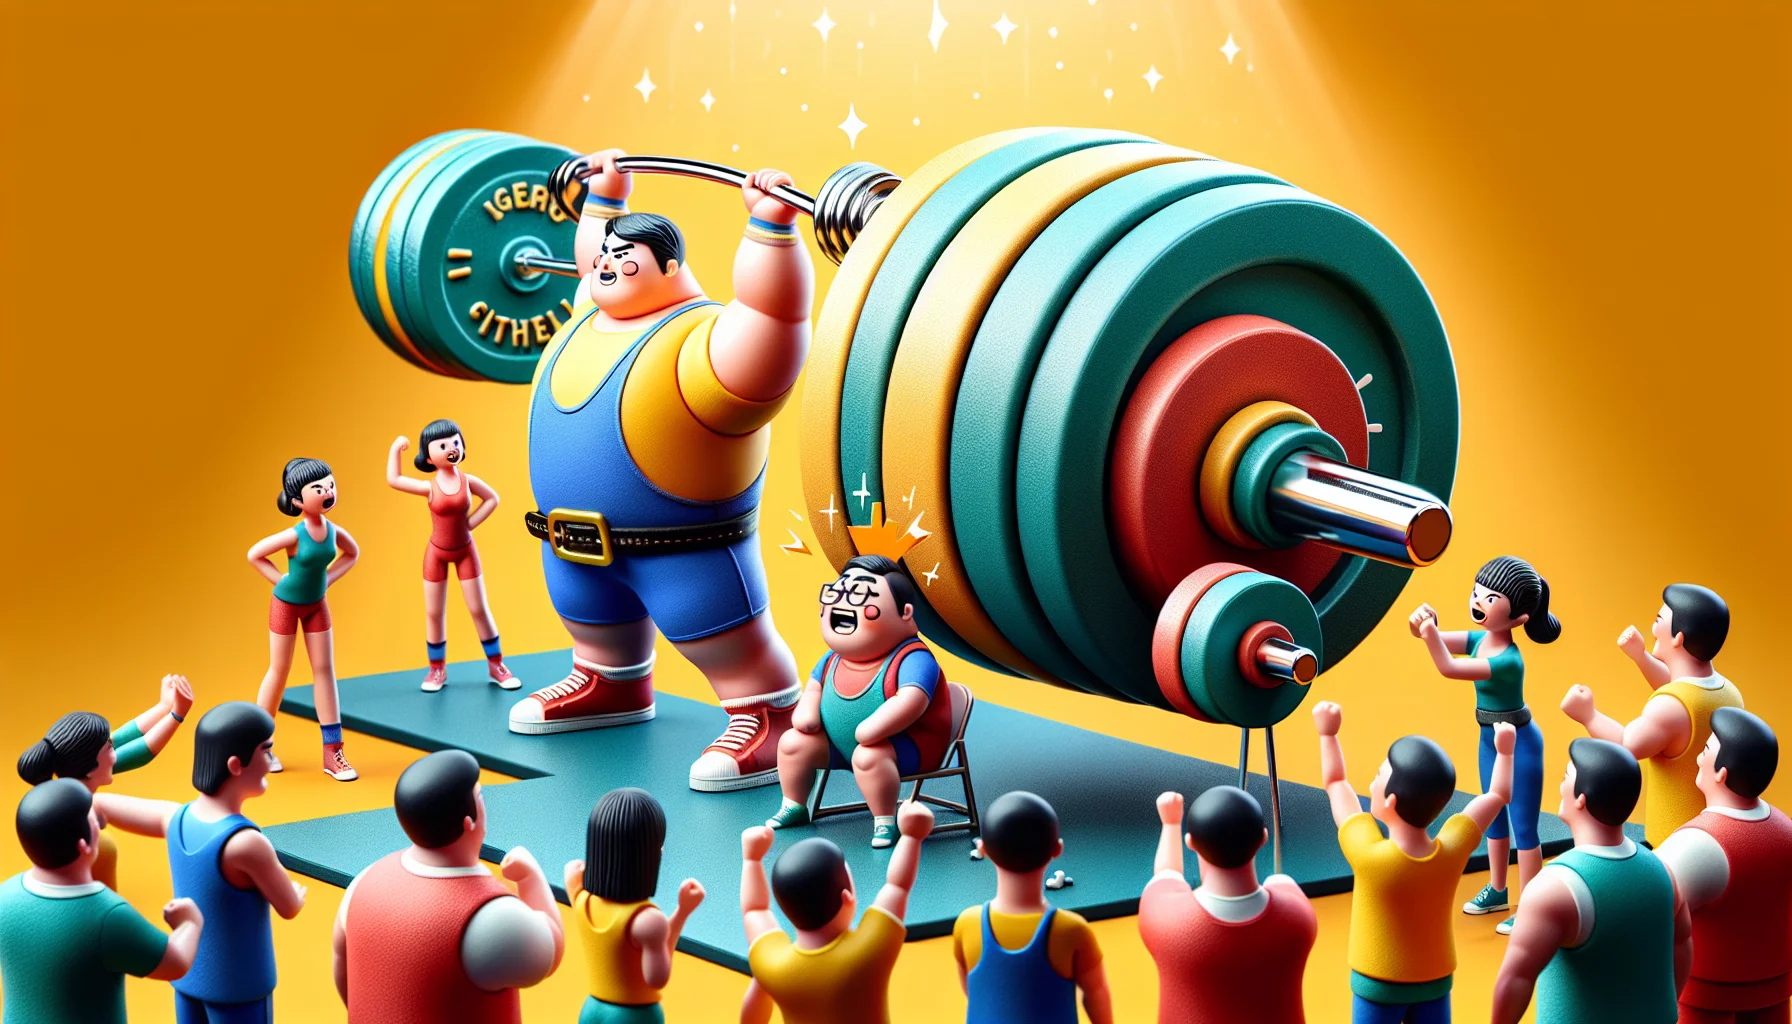 Comical and engaging representation of powerlifting, designed to inspire physical activity. Imagine a scene in a traditional gym setting, spotlighted are two powerlifters, one a Hispanic woman and the other an Asian man, in colourful workout clothes. The woman is attempting to heave an oversized, cartoonish barbell with little dumbbells acting like cheerleaders on the sides, cheering both lifters. The man, on the other hand, is surprised by a mini barbell lifting itself. Riding the tone of fun and absurdity, this image aims to lessen the intimidation surrounding powerlifting and encourages everyone to engage in exercise.